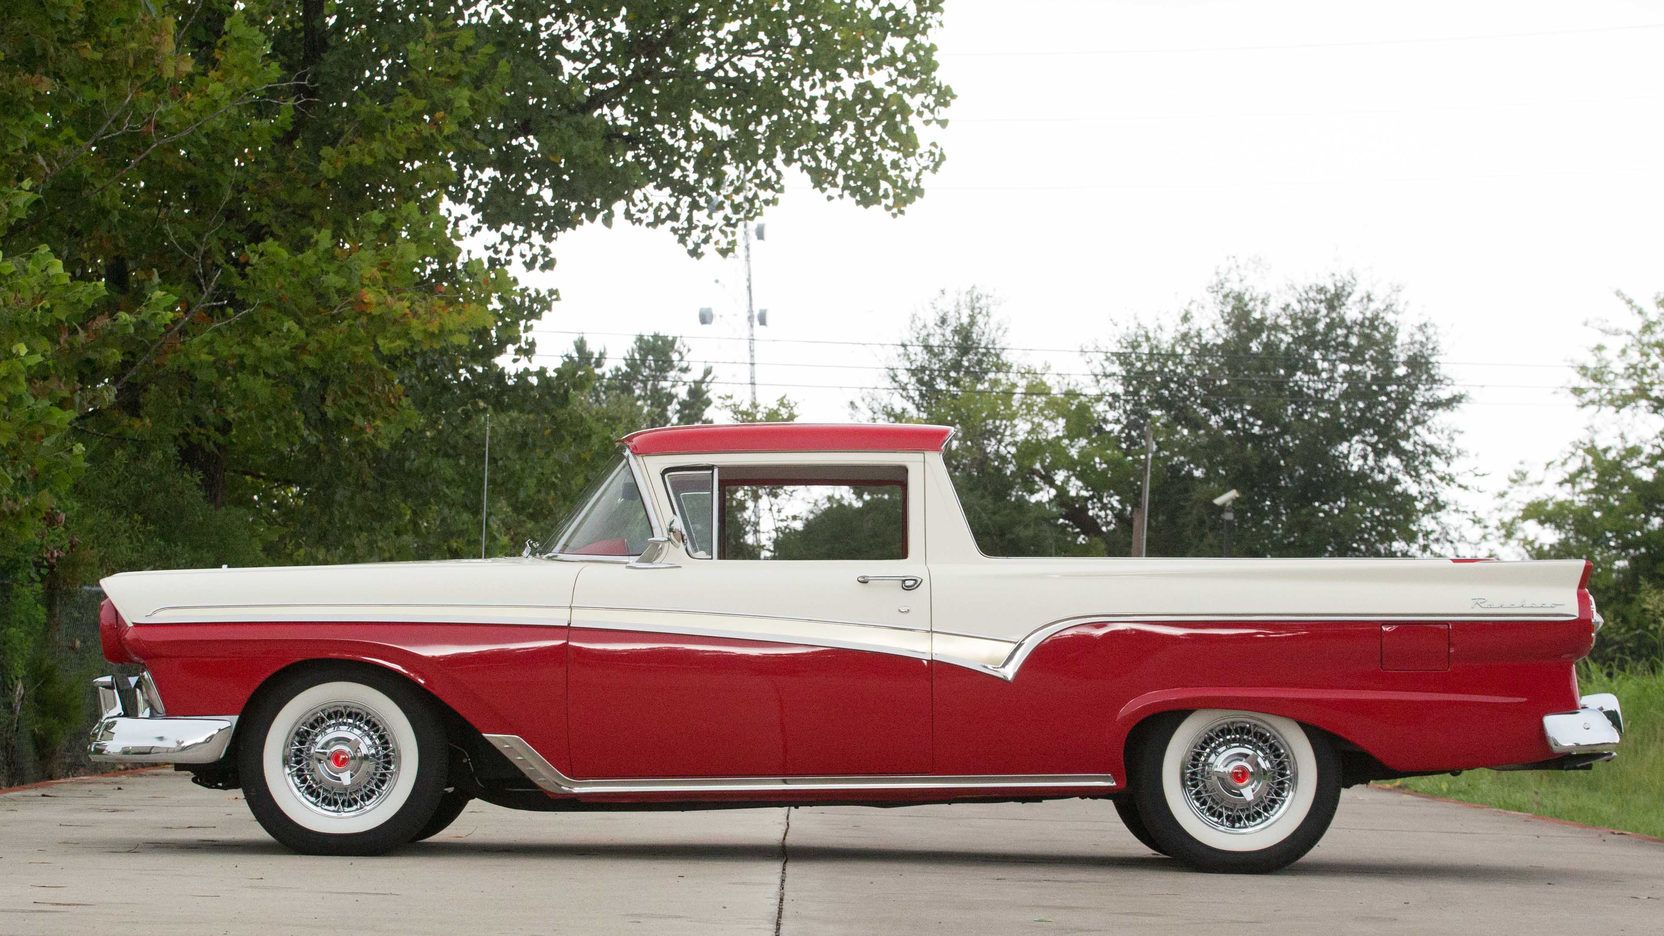 A parked 1957 Ford Ranchero on display